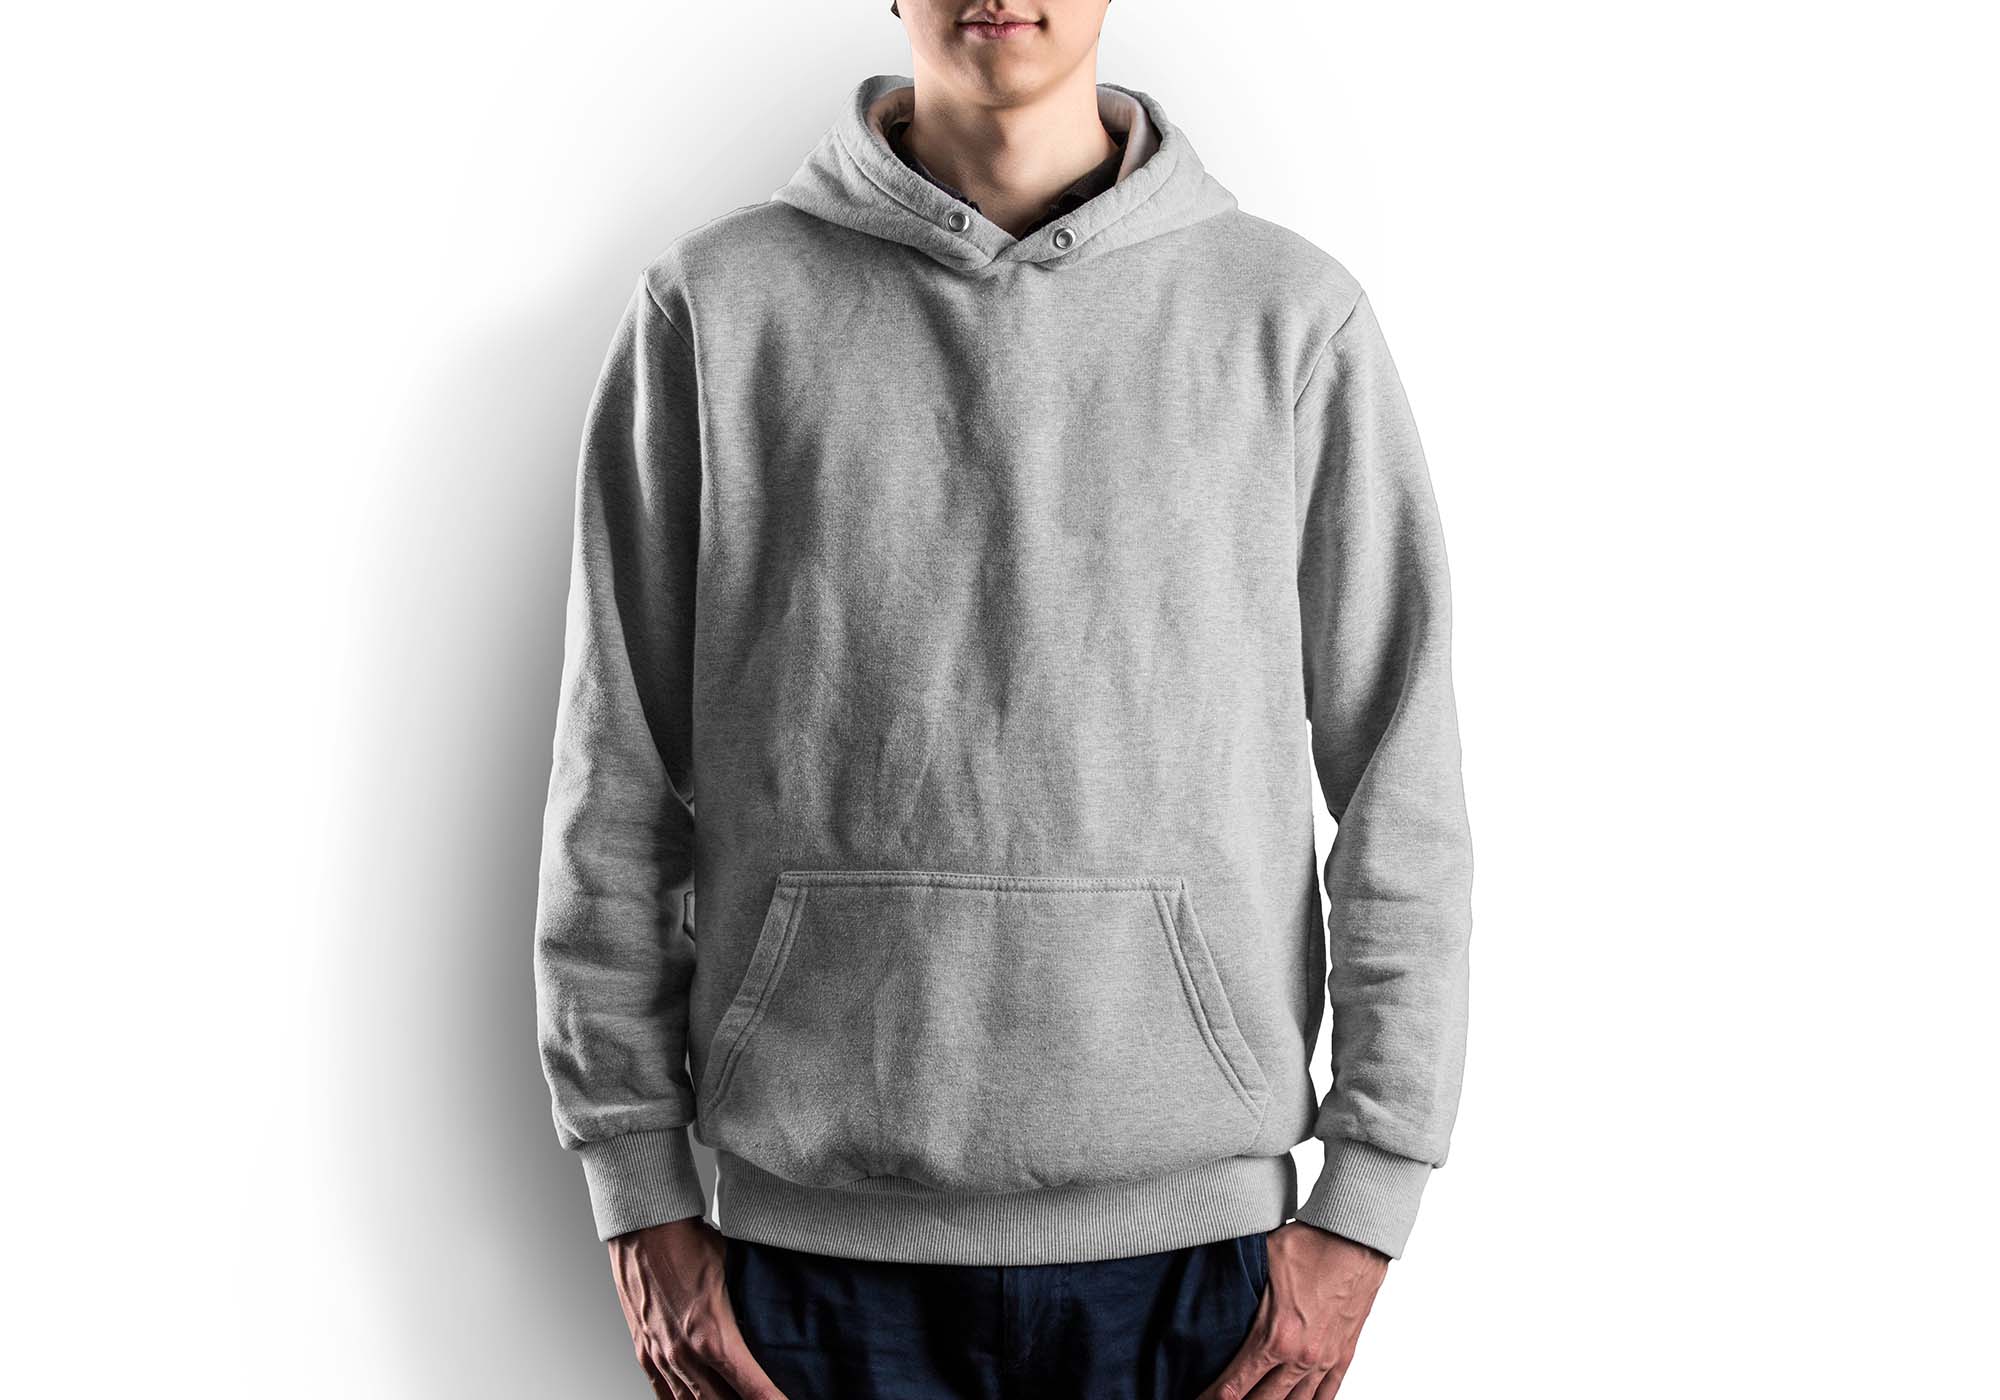 Download Realistic Hoodie PSD Mockup (Free) by Graphics Fuel